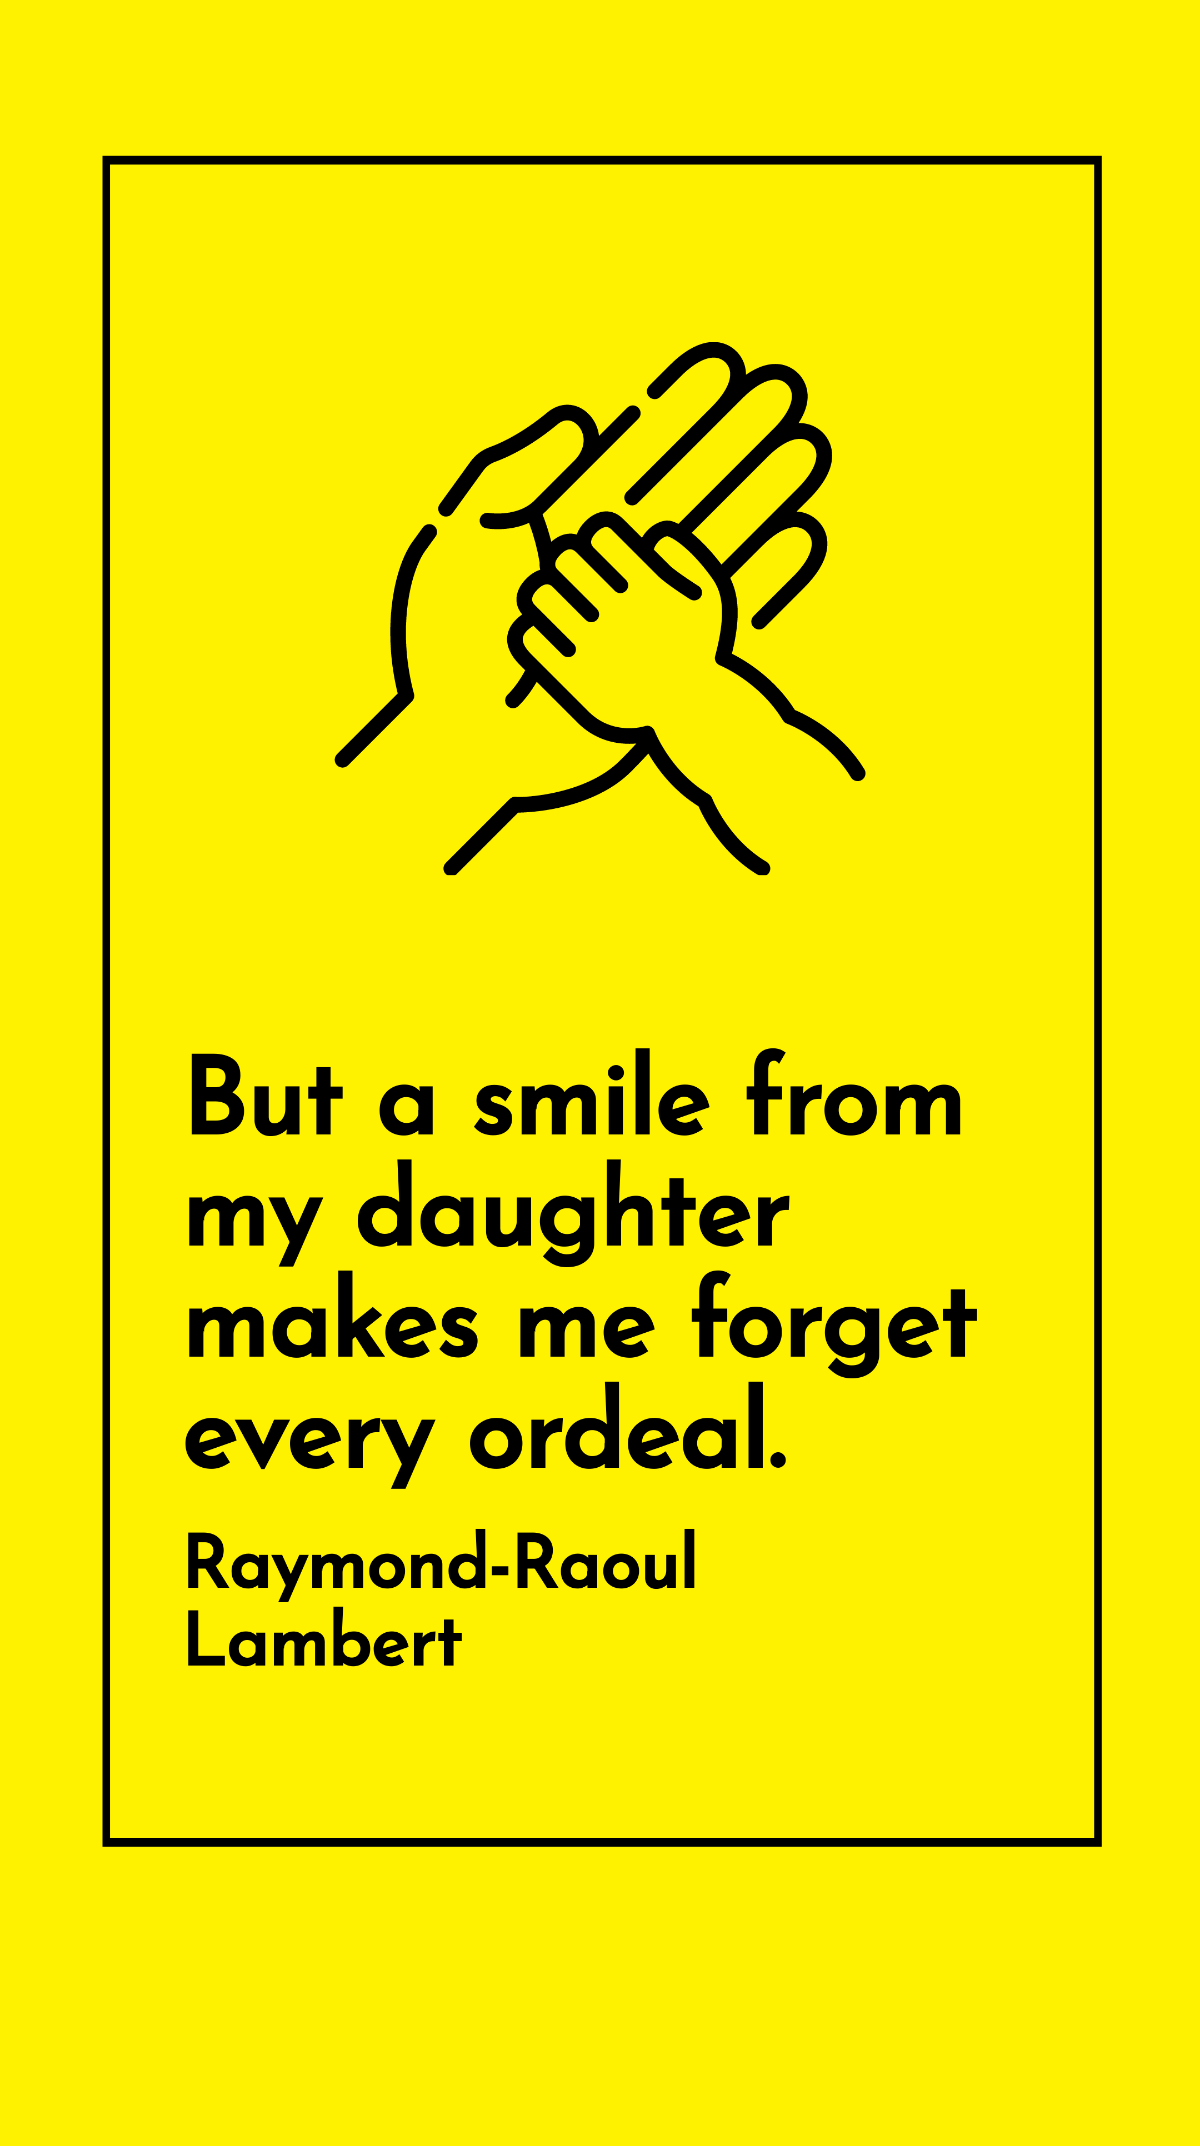 Raymond-Raoul Lambert - But a smile from my daughter makes me forget every ordeal.